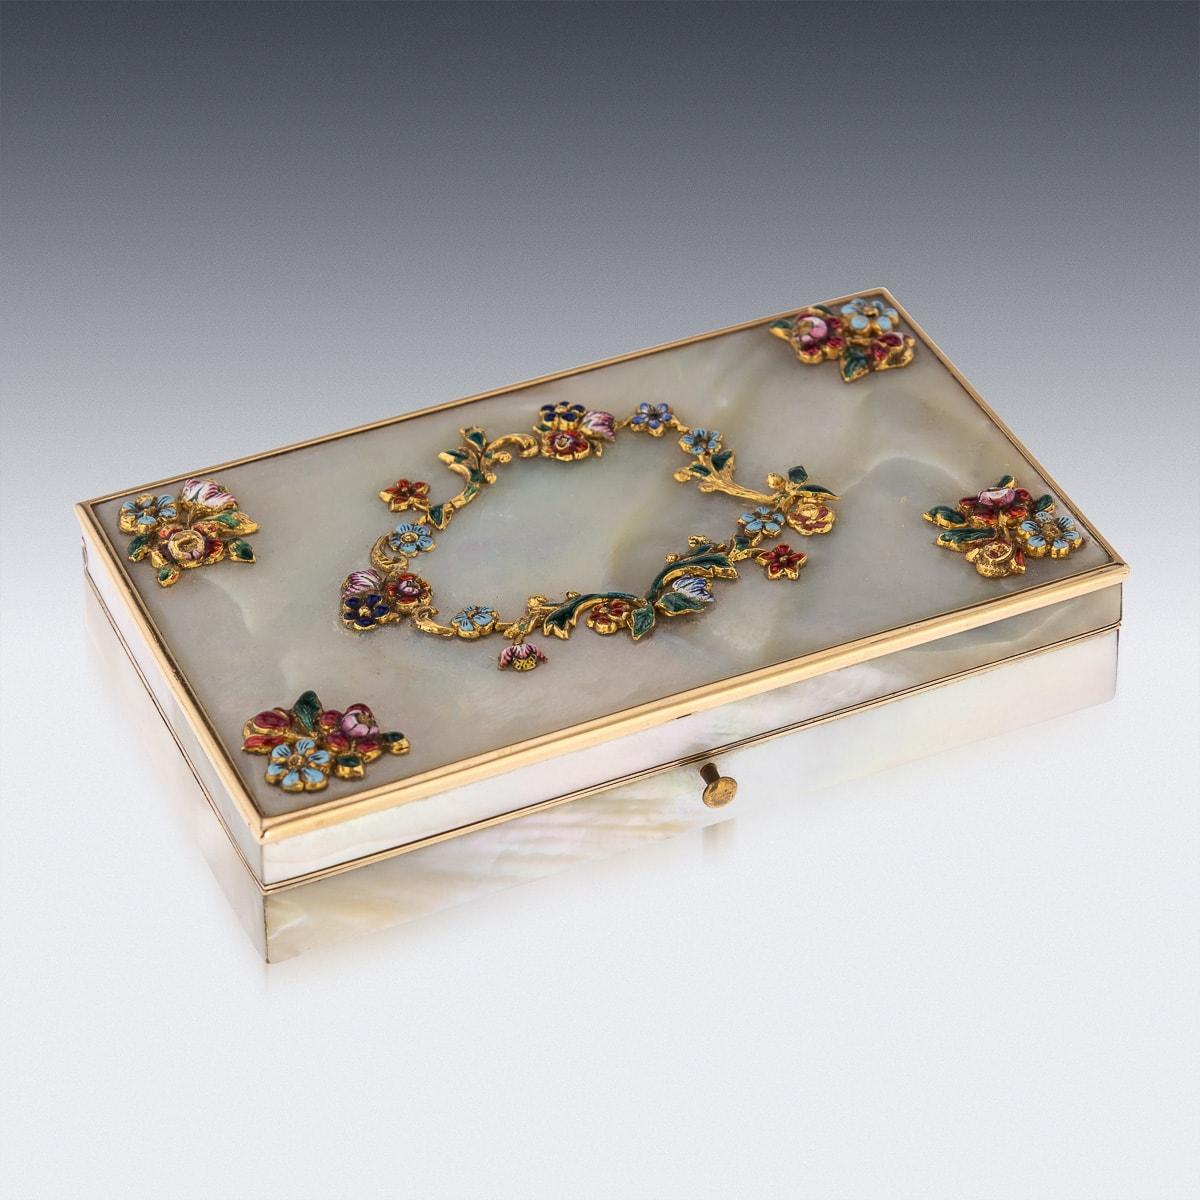 Antique 19th Century French gold mounted on mother of pearl, extensive traveling etui set, of elongated octagonal form, the gold mounted with polished mother of pearl panels and the lid applied with cast and enamelled floral decoration, the lid